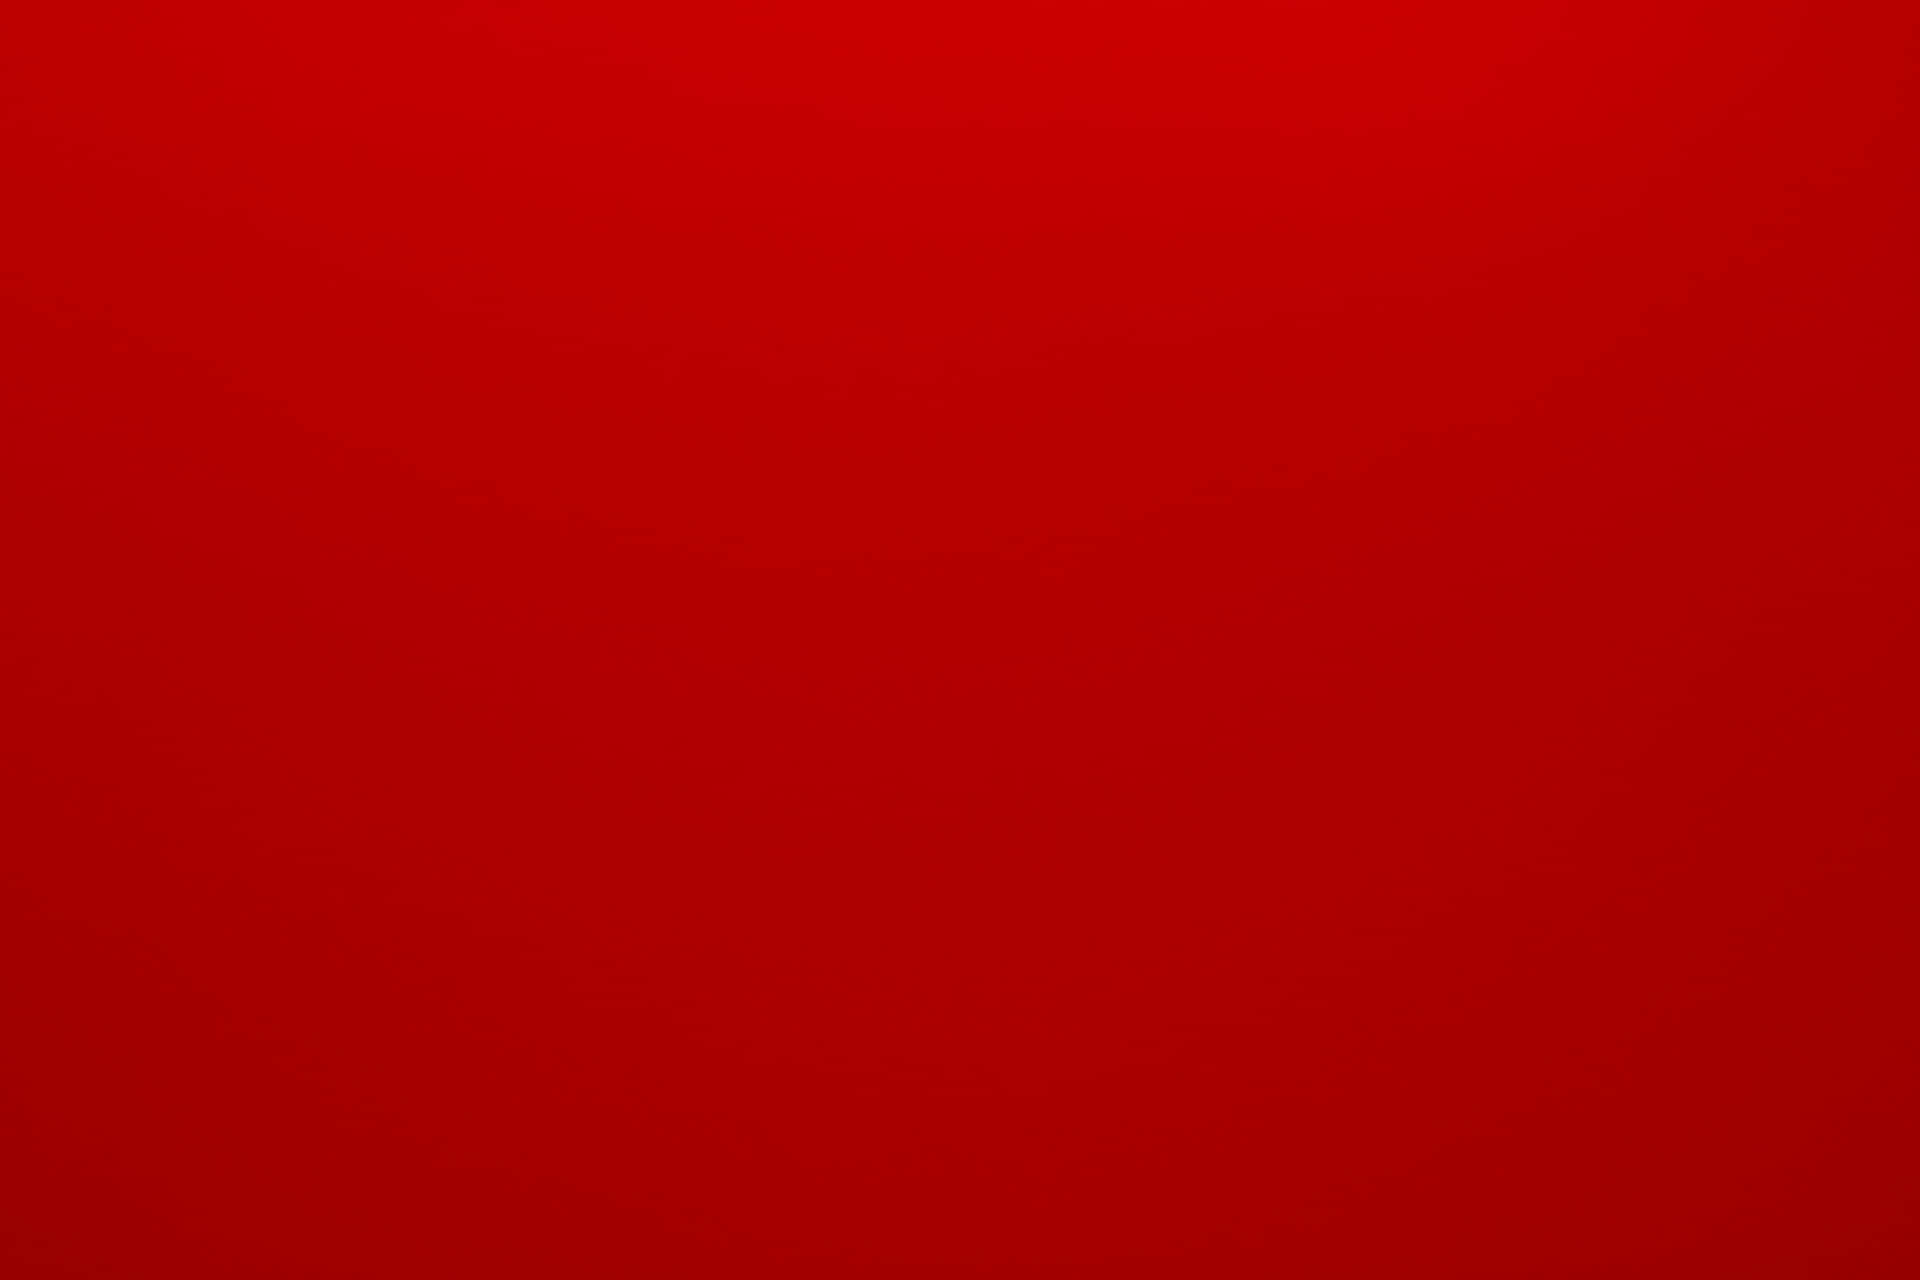 Bright and Bold Solid Red Background